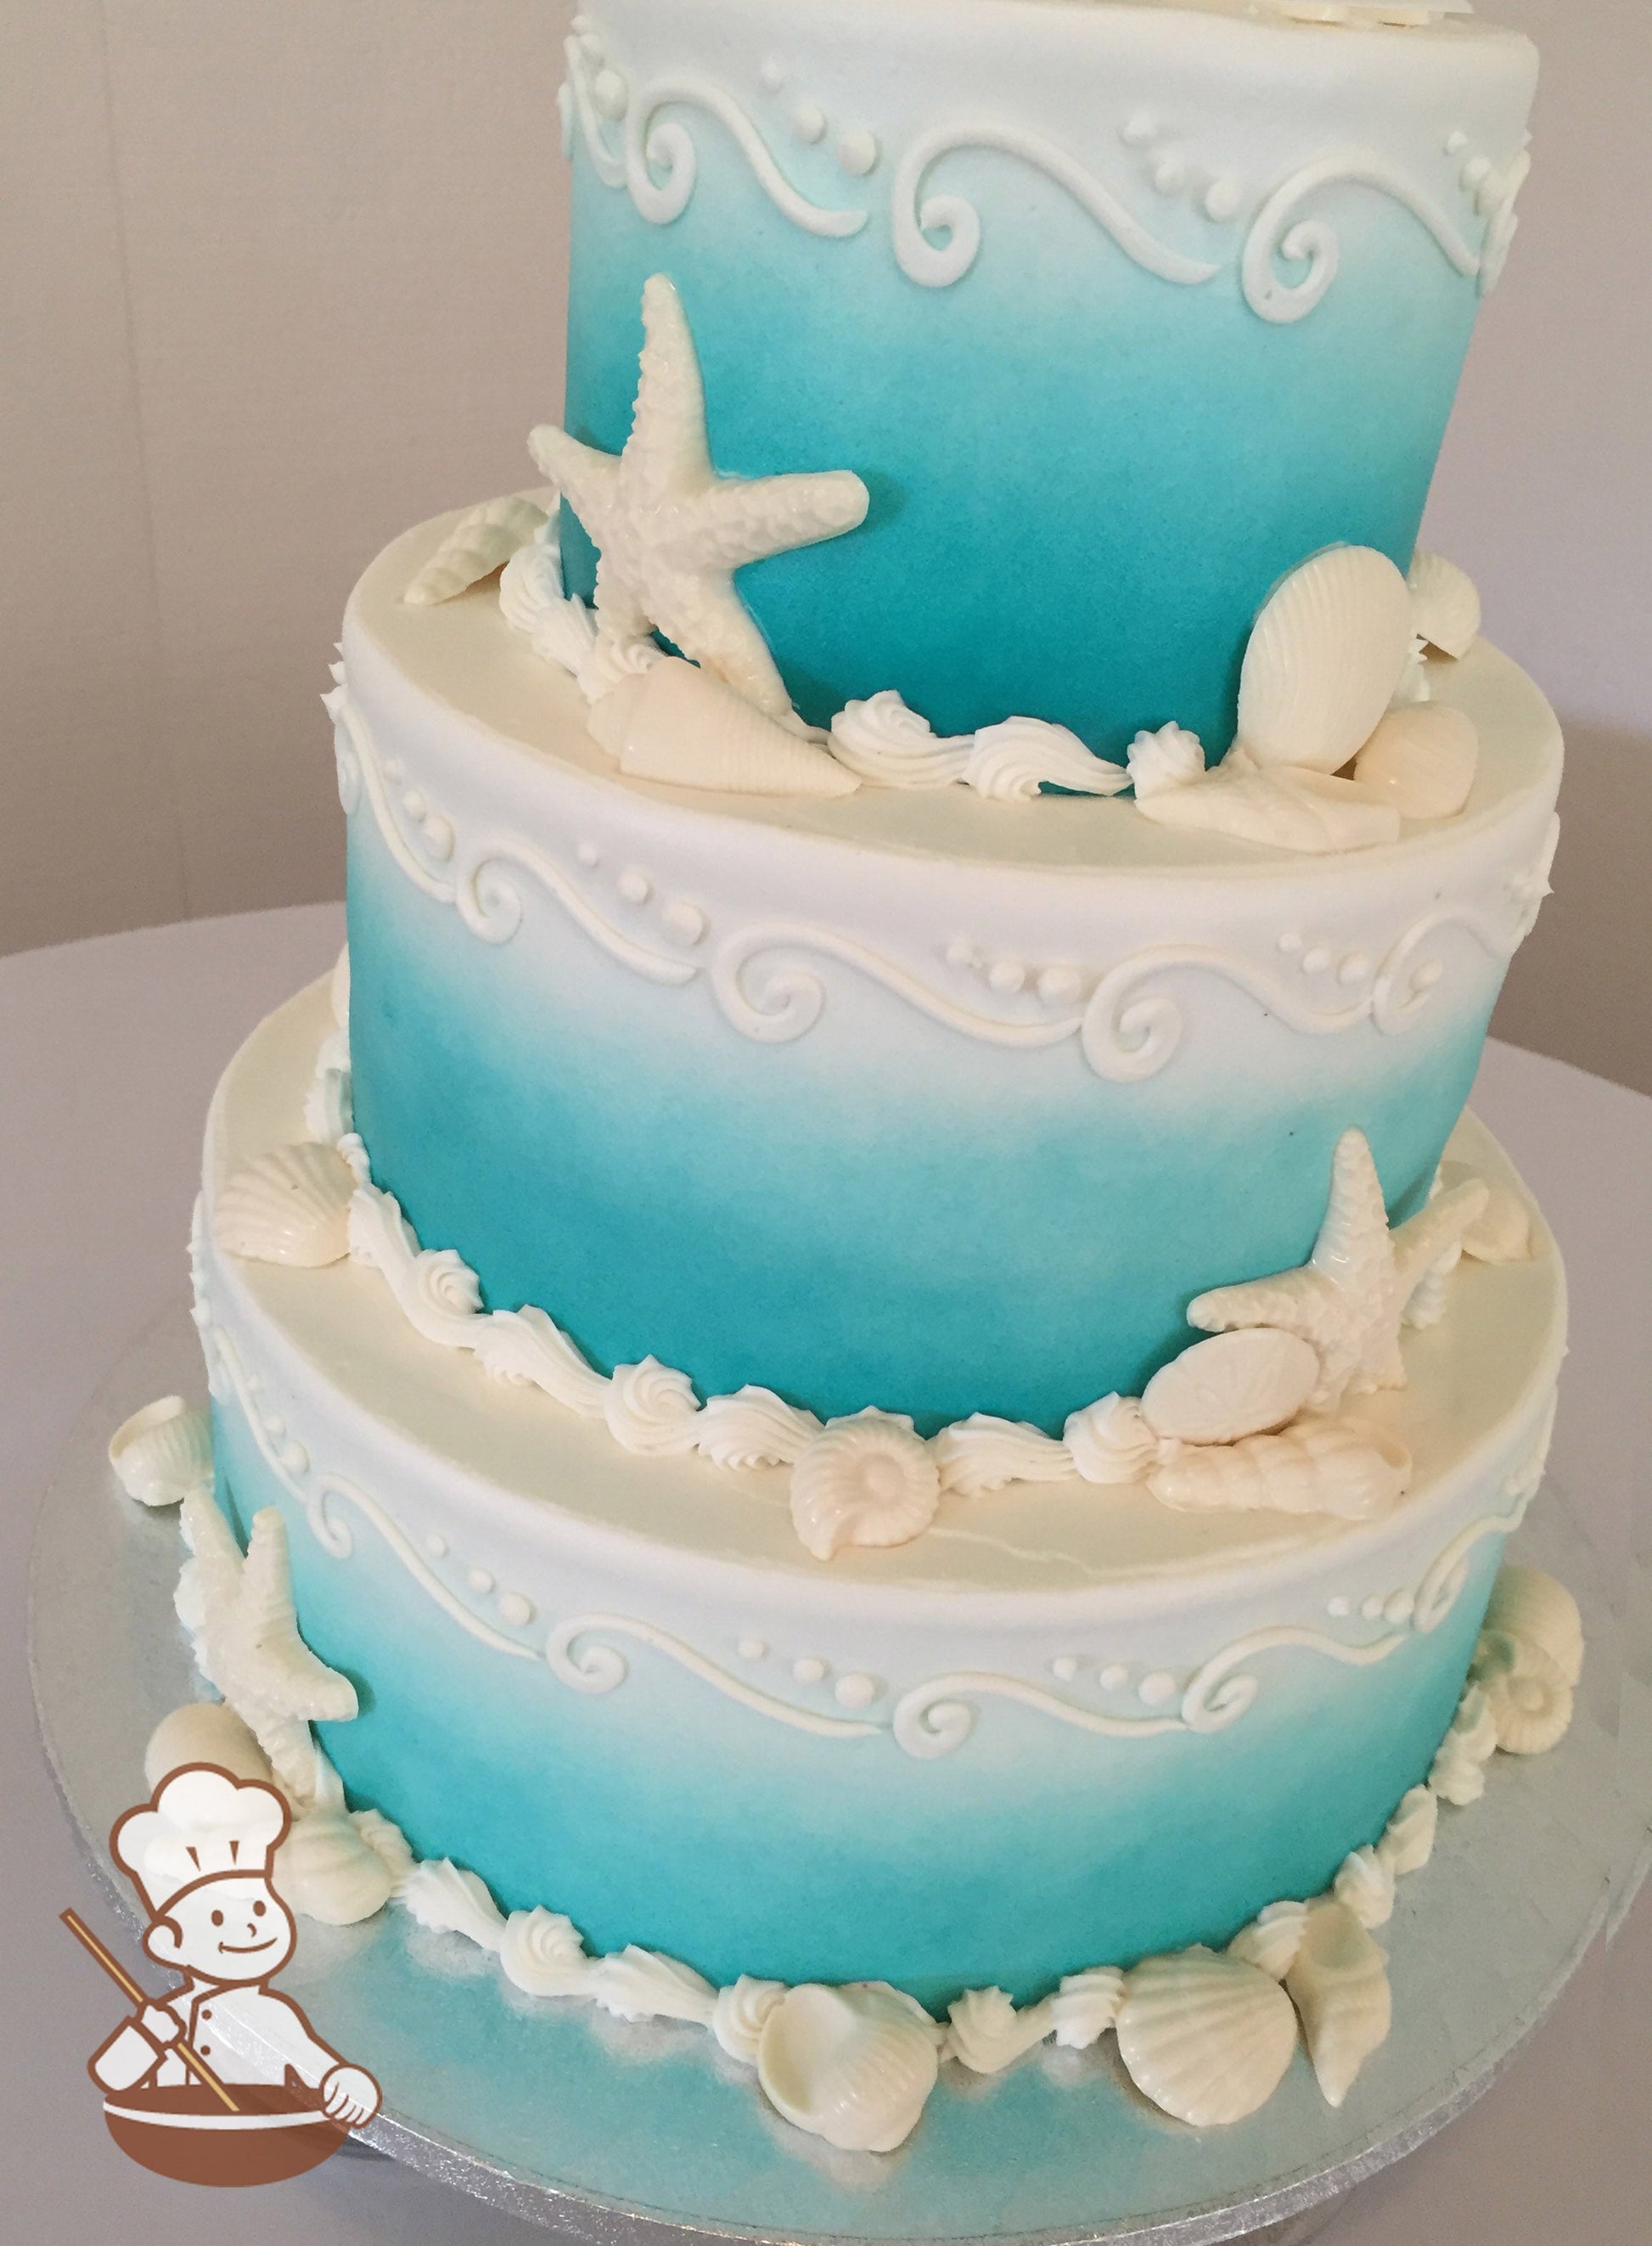 3-tier cake with smooth white icing and decorated with an ombre blue coloring, white buttercream scrolls and seashells.